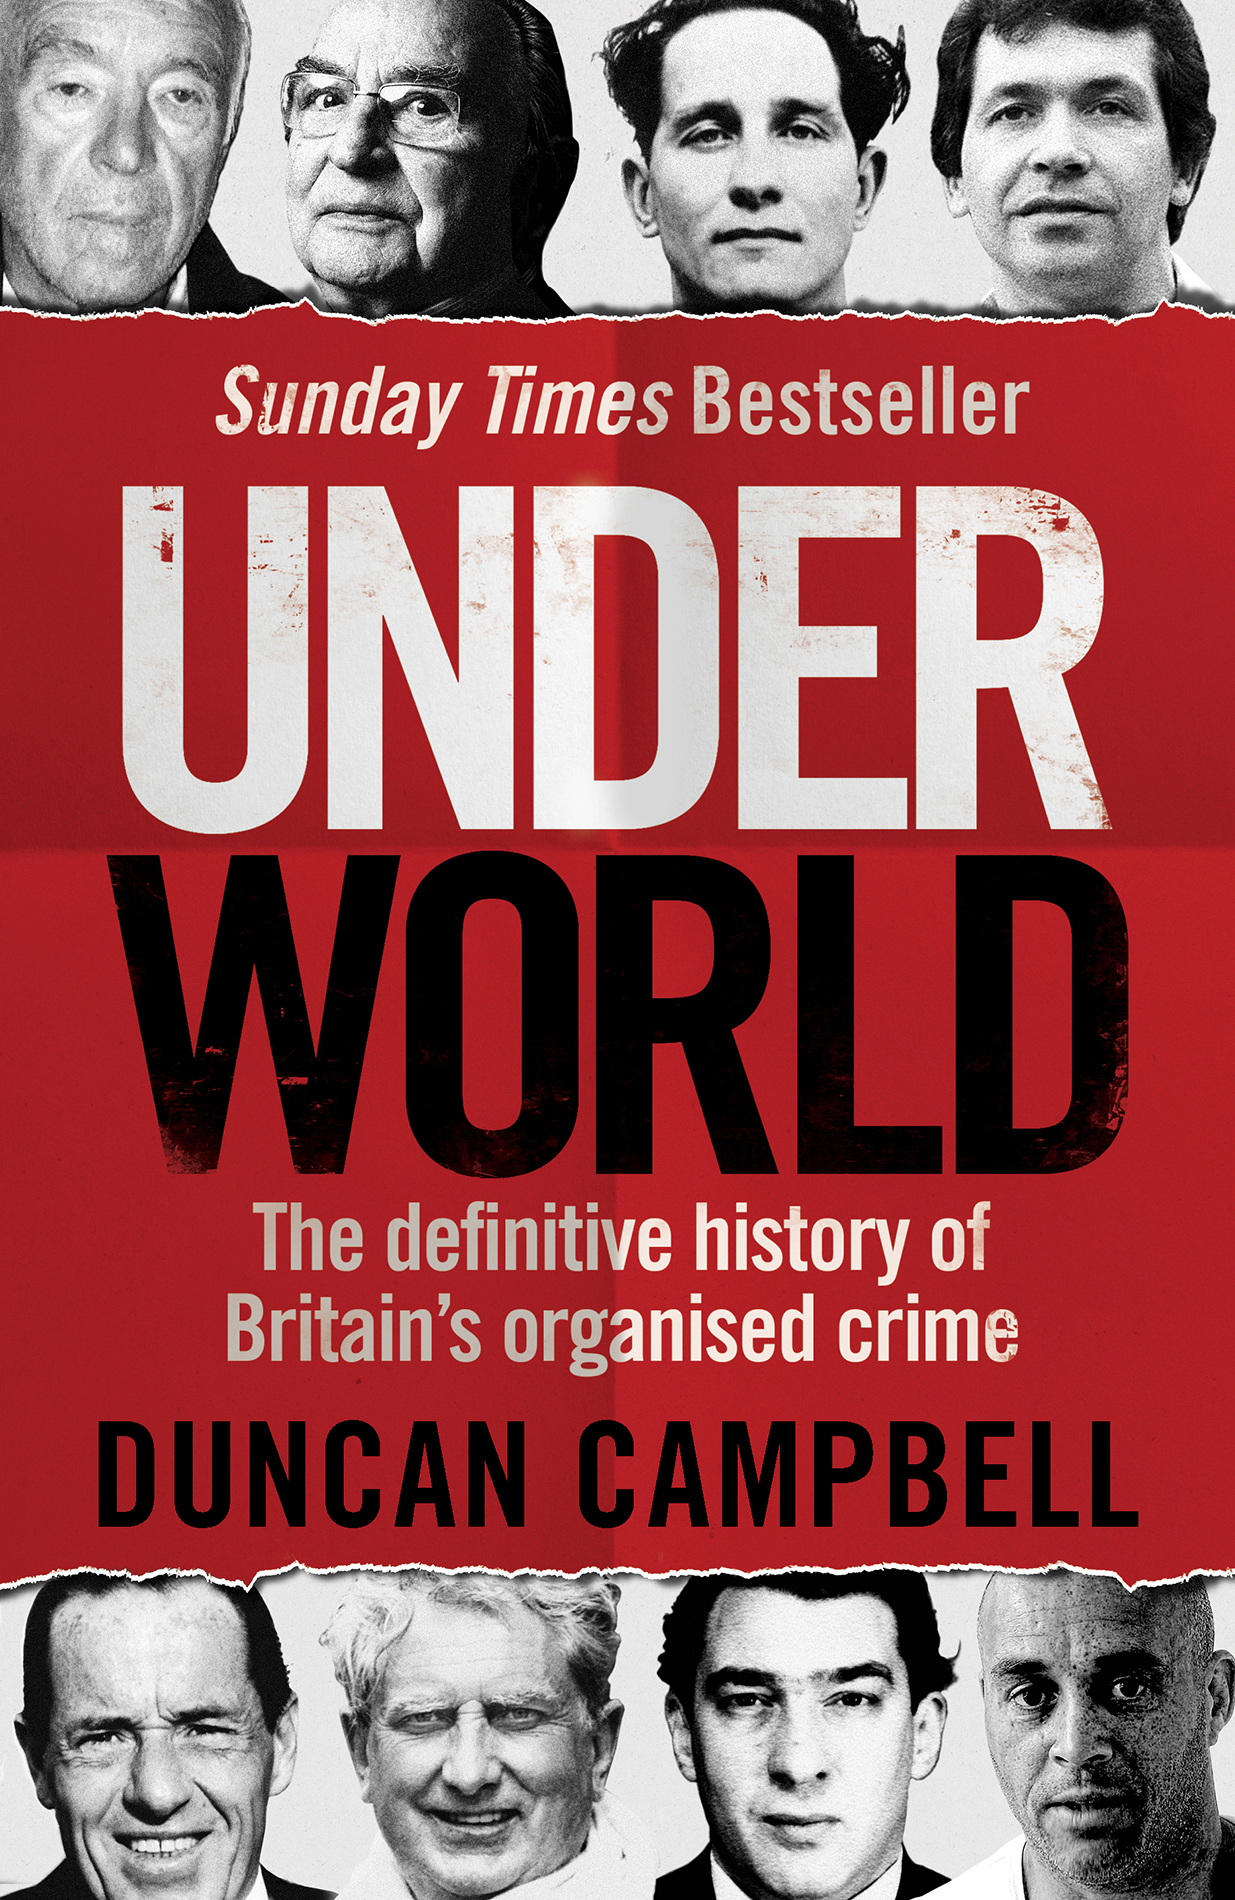 Duncan Campbell UNDERWORLD CONTENTS ABOUT THE AUTHOR Duncan Campbell - photo 1